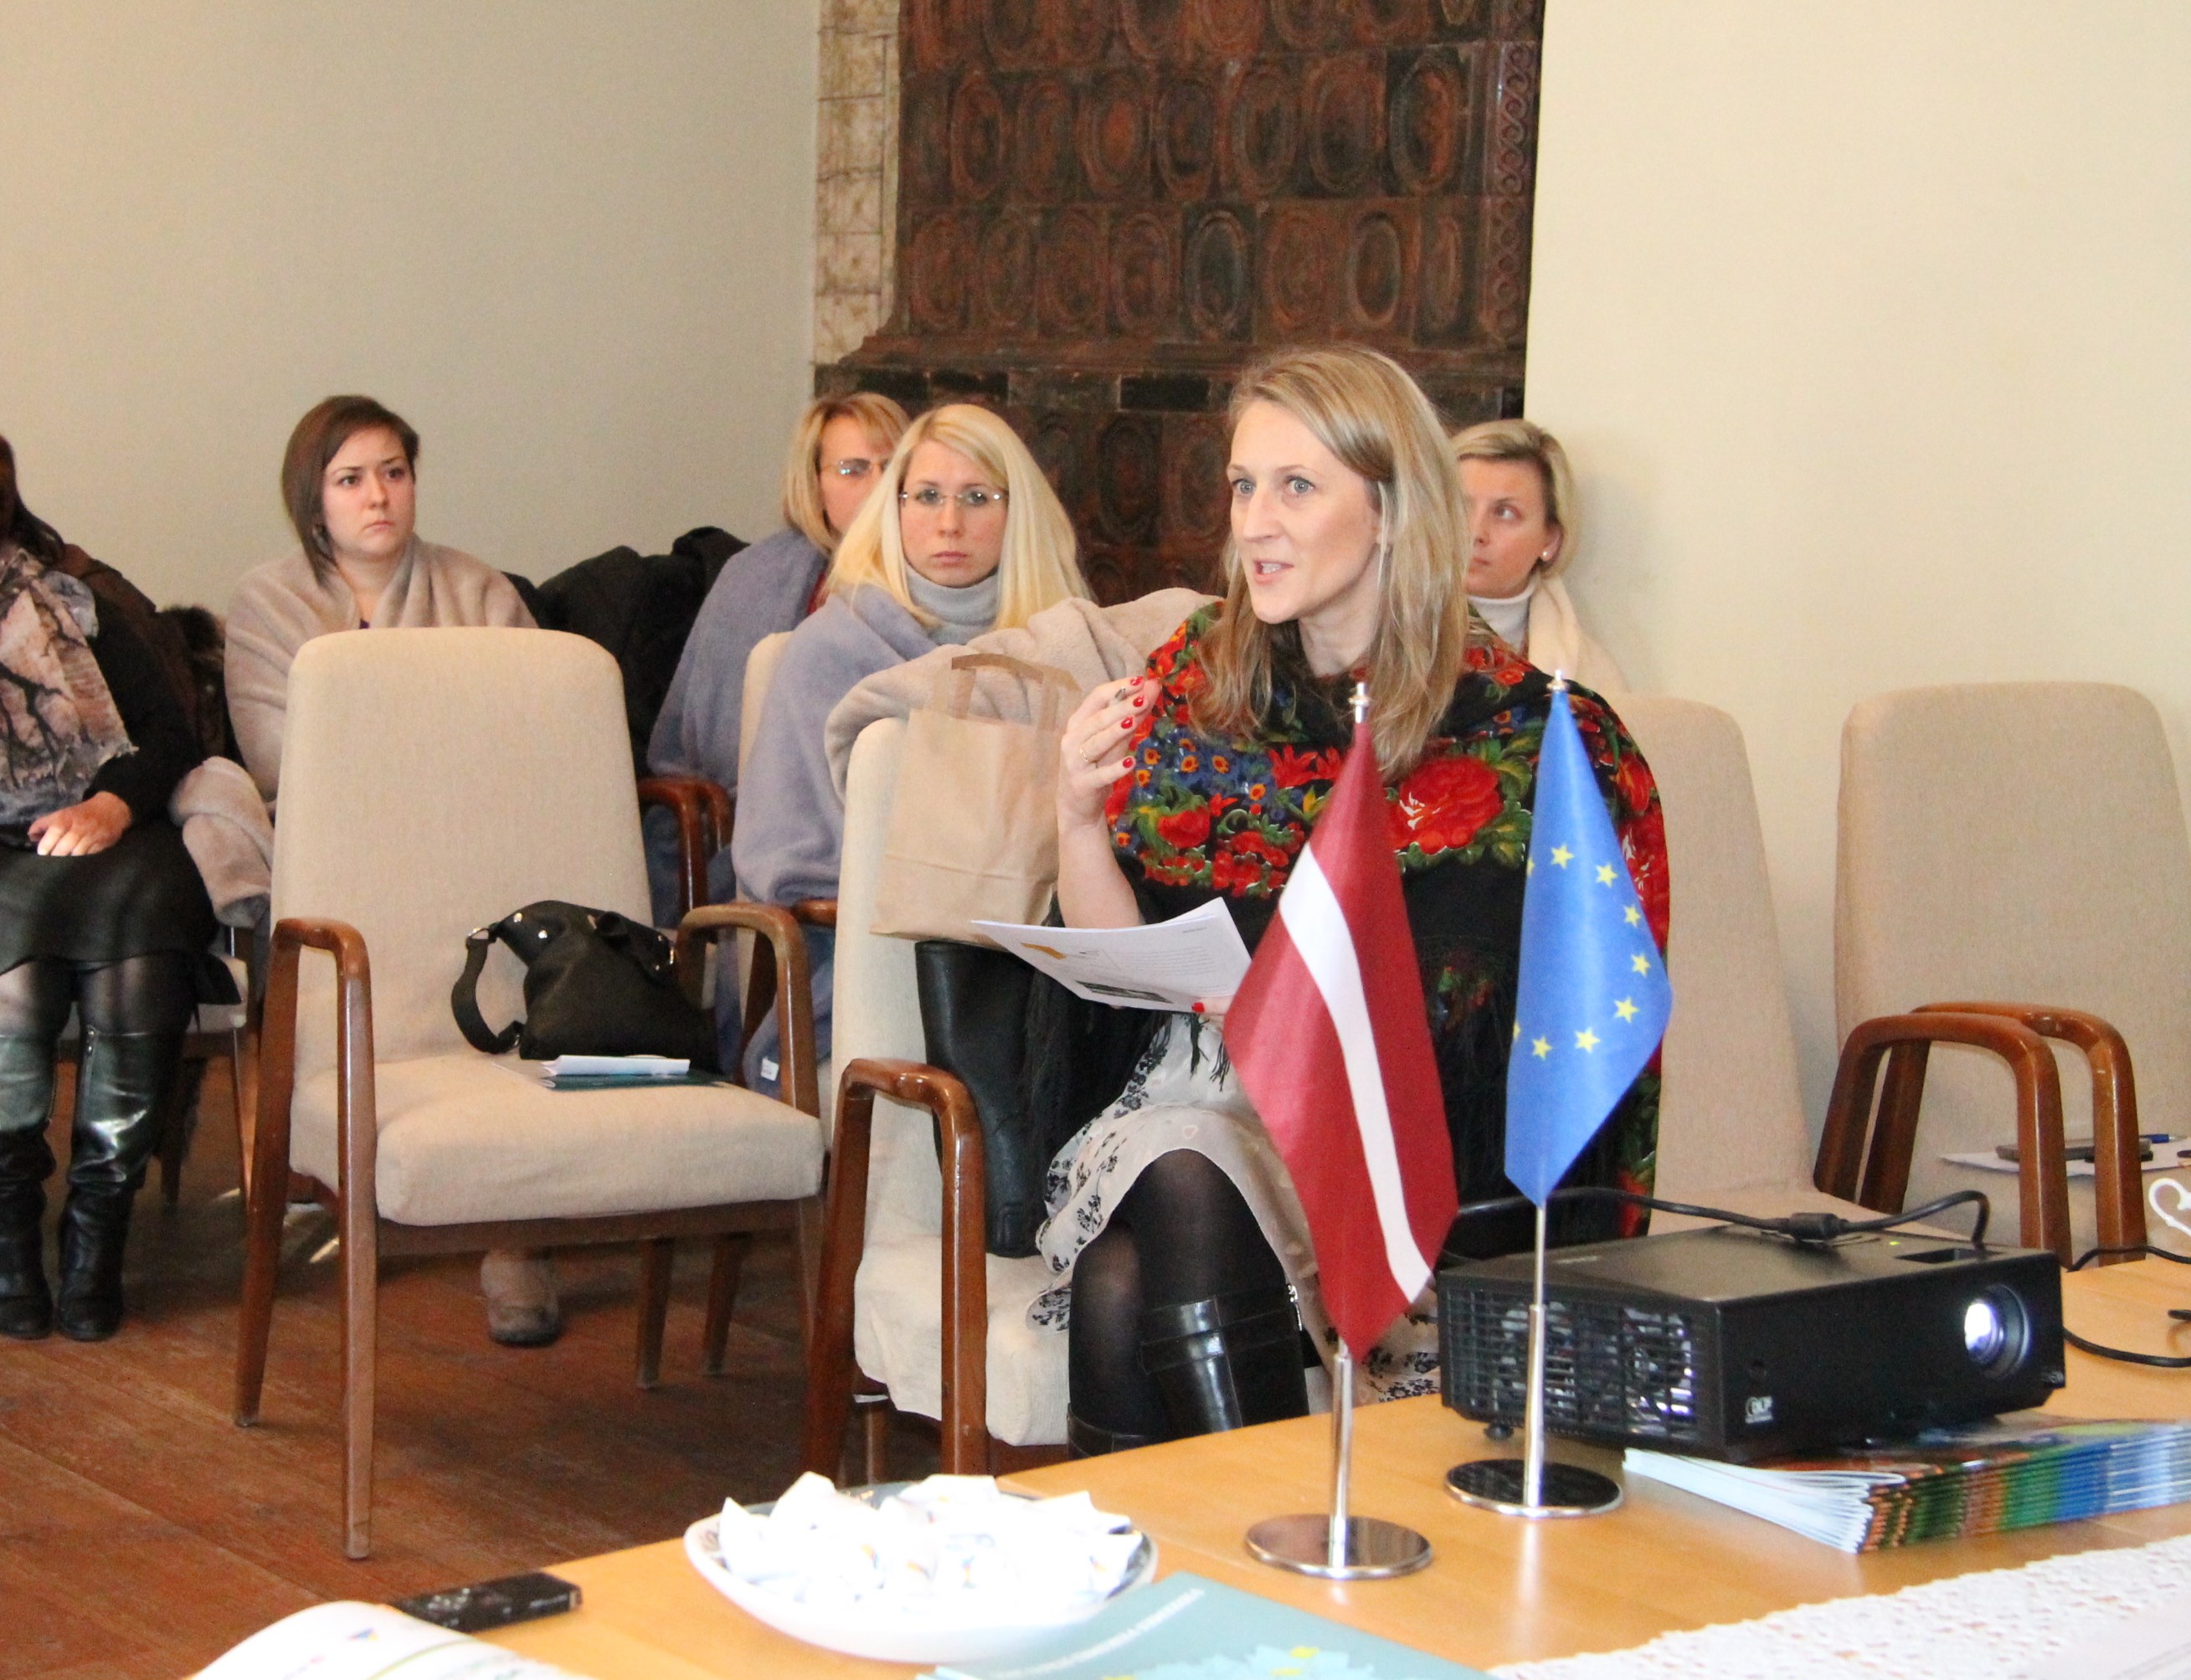 2nd stakeholder group meeting in Latvia